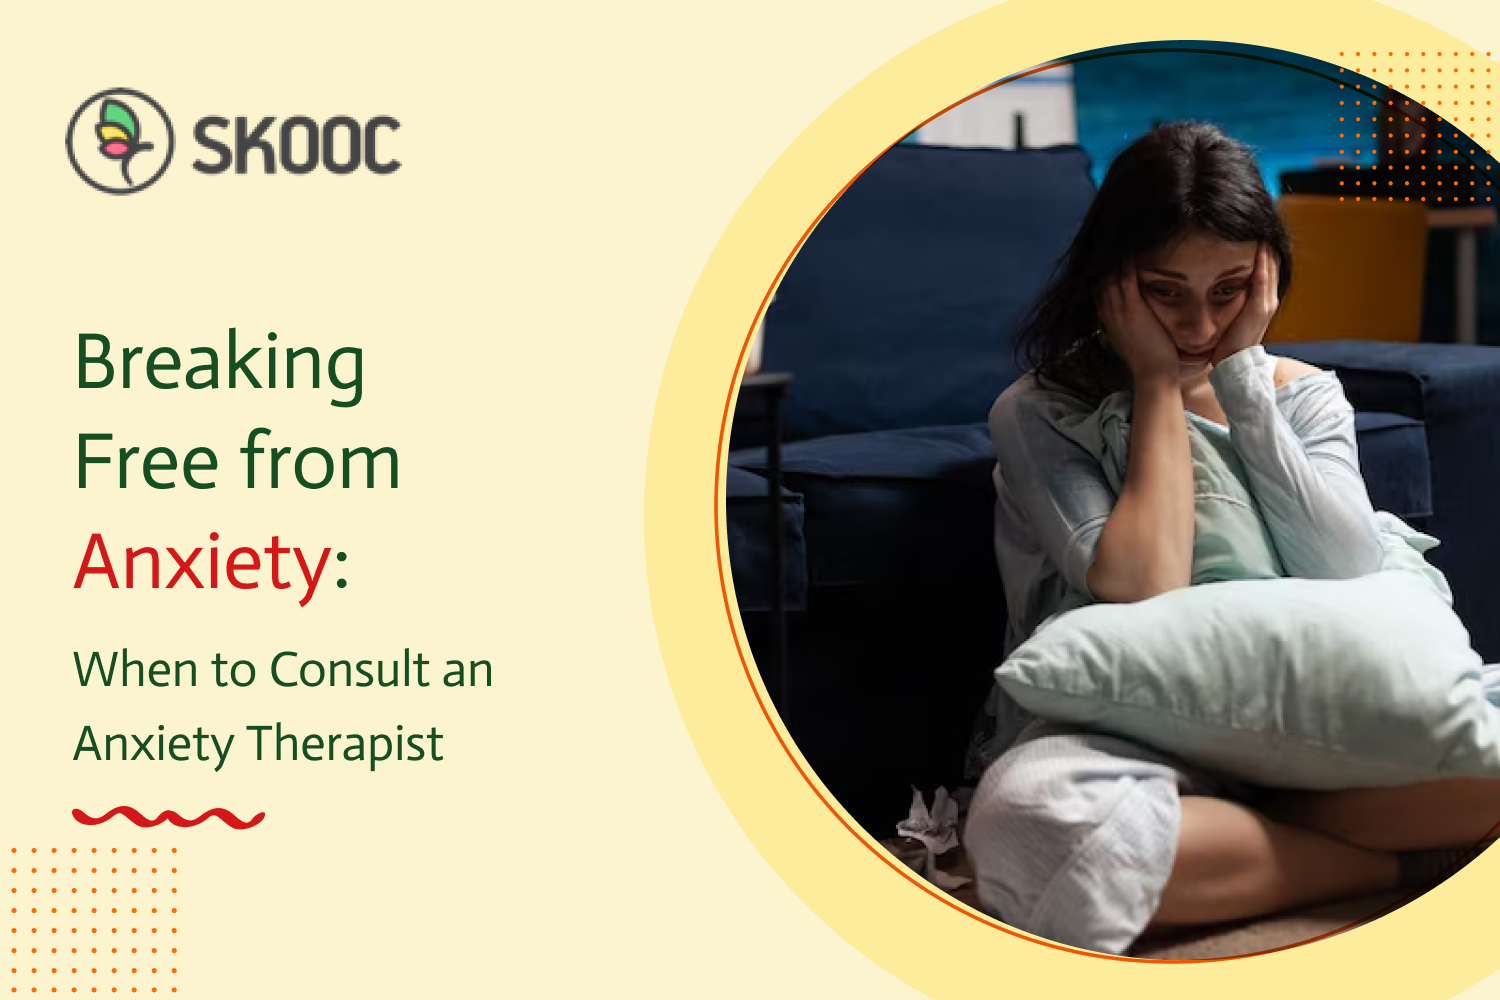 Anxiety therapy at skooc